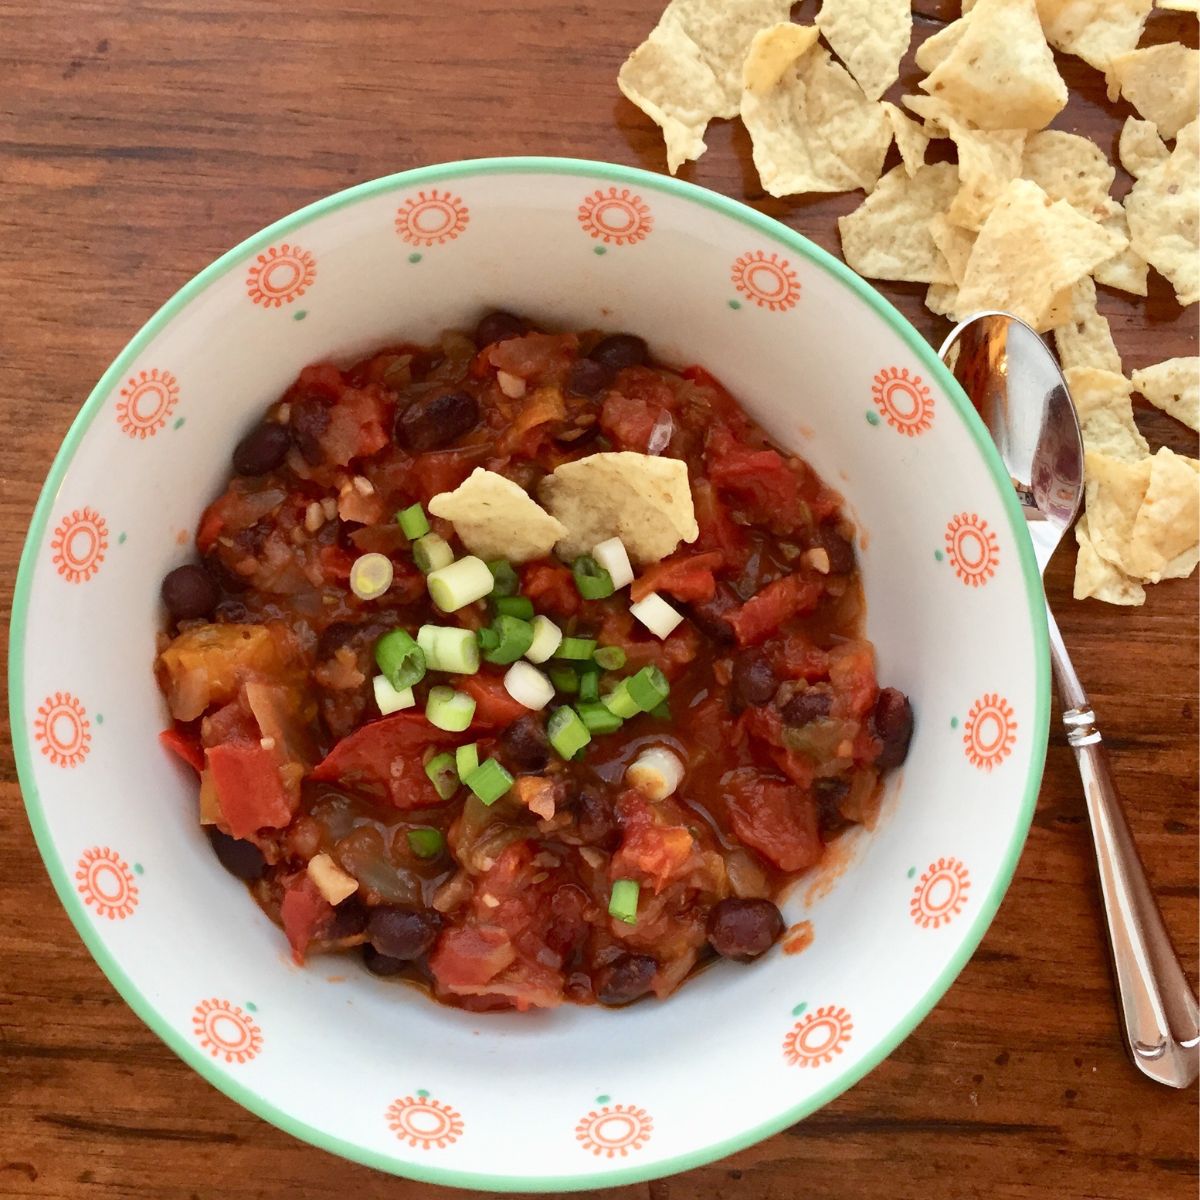 A bowl of plant based black bean chili and fritos chips.